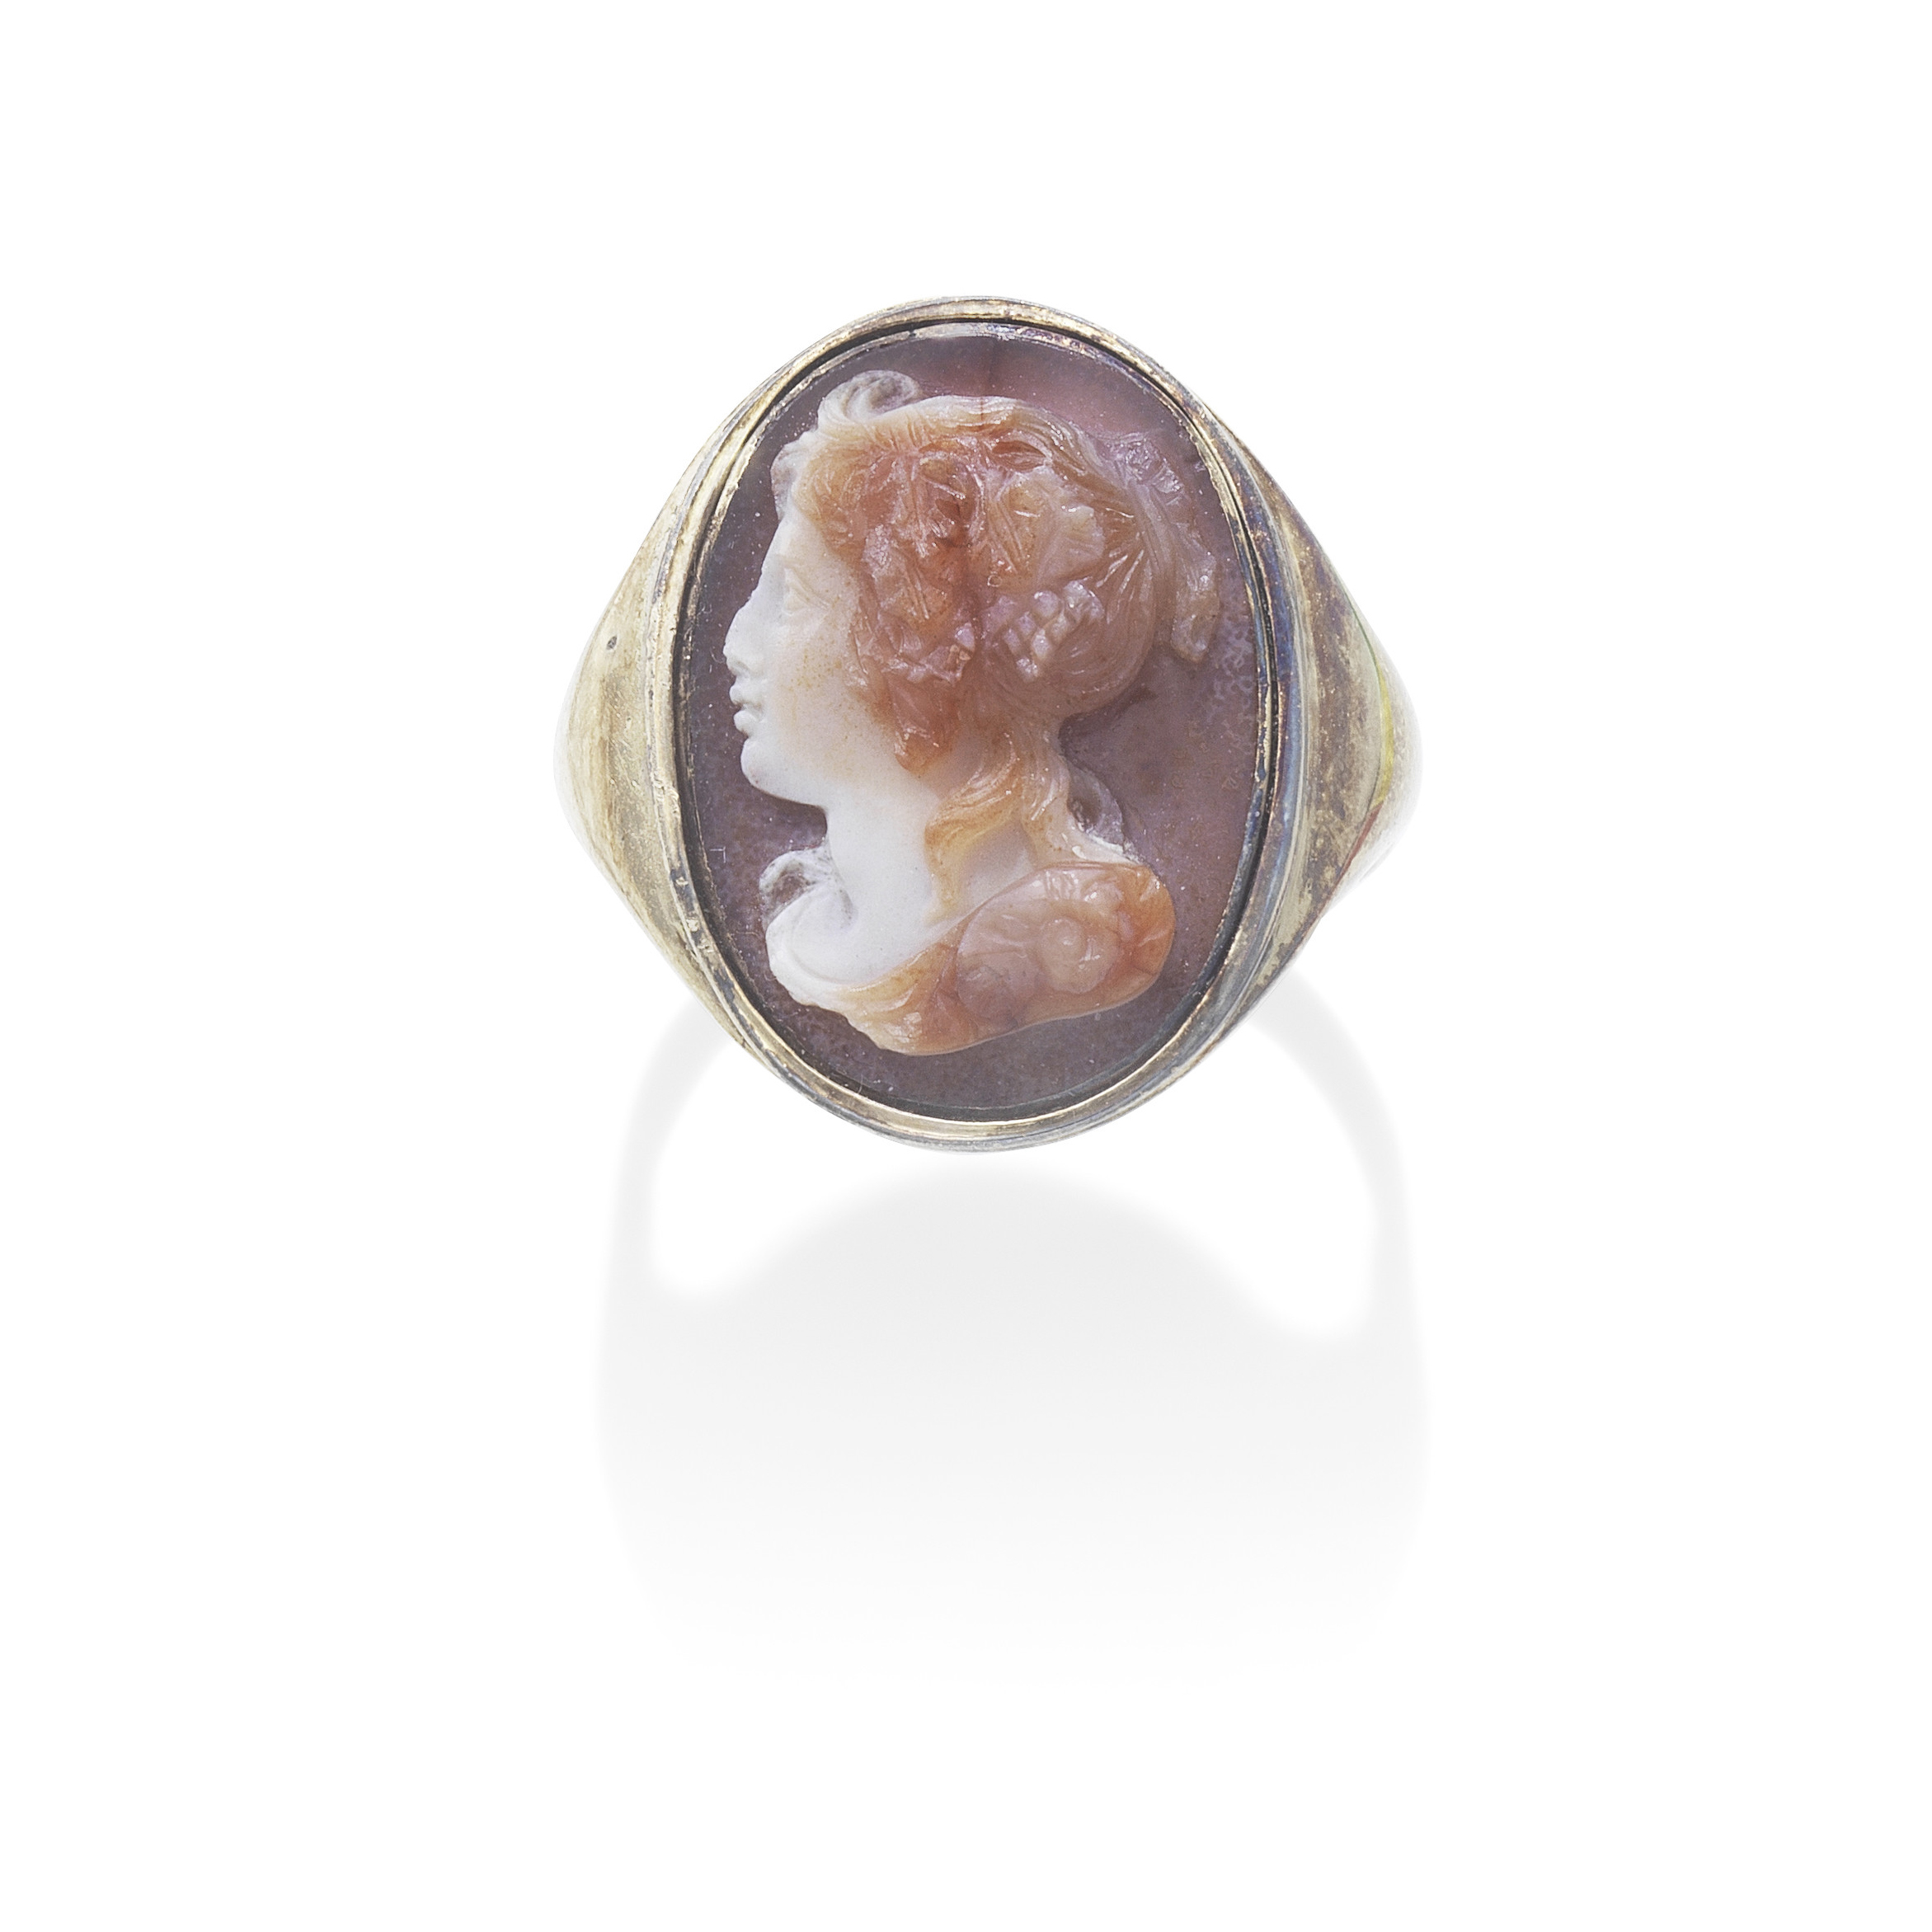 A GOLD AND AGATE CAMEO RING, EARLY 19TH CENTURY - Image 3 of 3